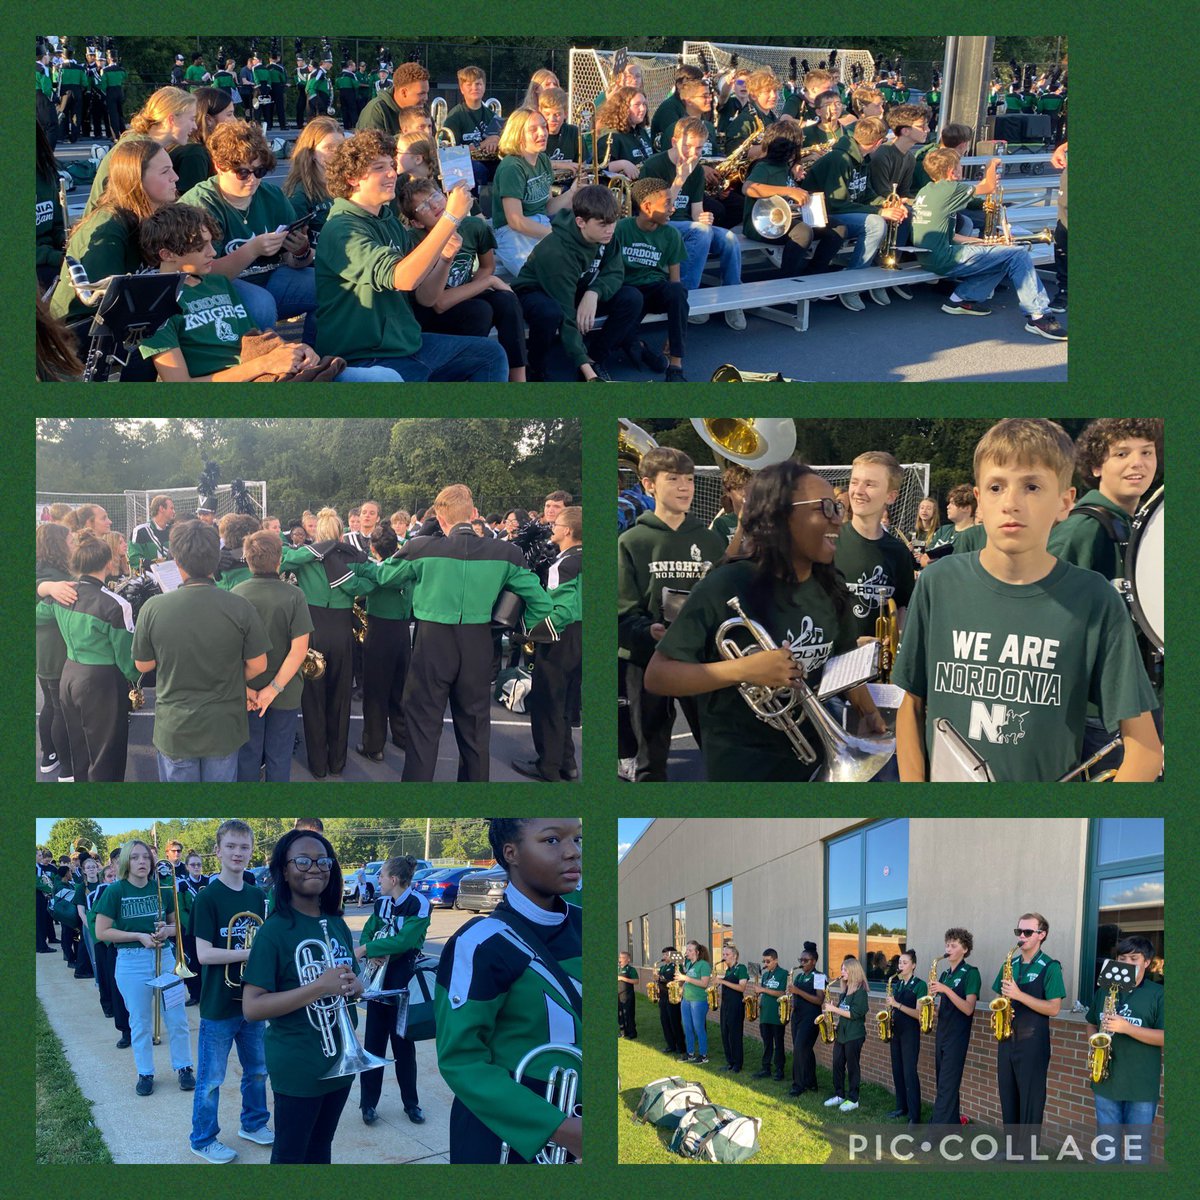 The 8th graders had a blast last night at the football game. Shout out to HS band for making them feel so welcome in our band family.  #NordoniaBandRocks #LoveTheseKids @BryanMSeward @NordoniaSchools @MSchrembeck